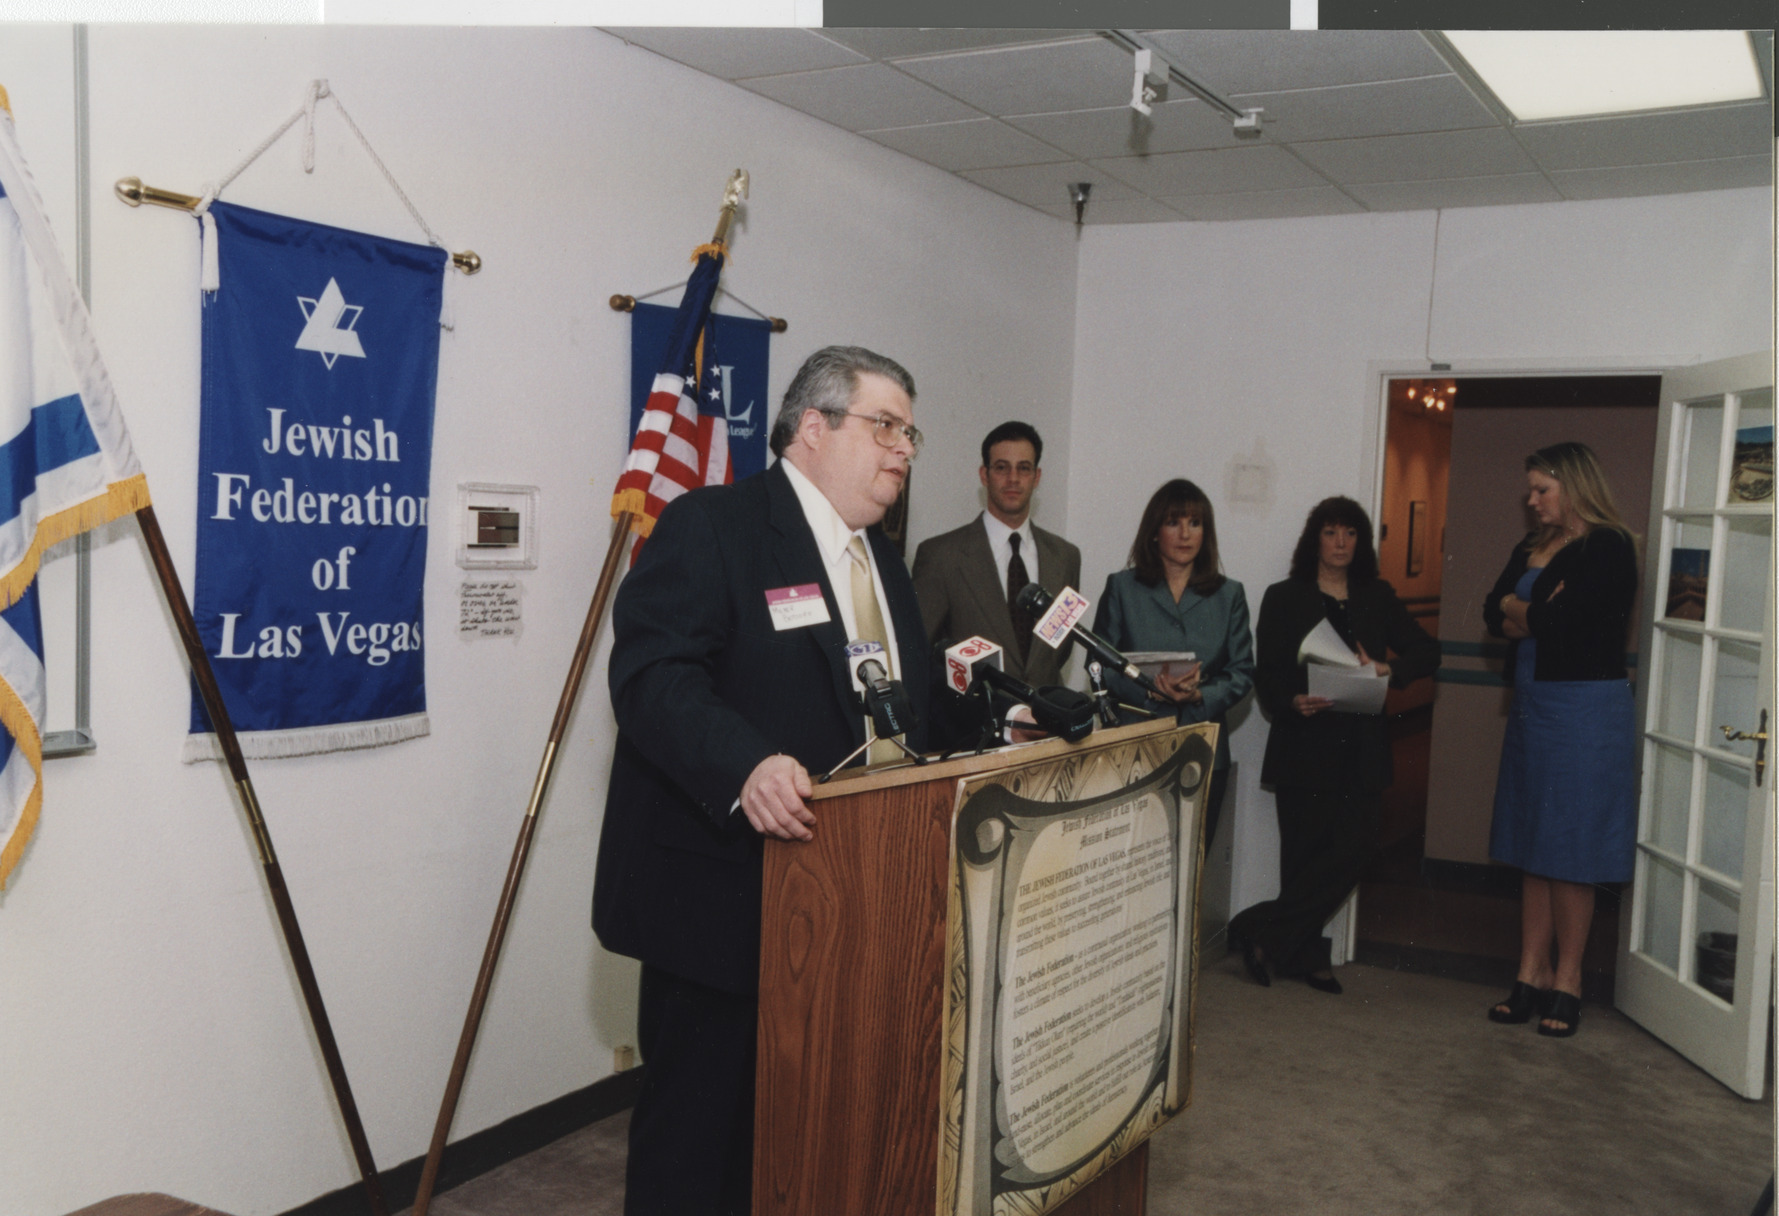 Photograph of Mid-East Conflict Press Conference, October 2000